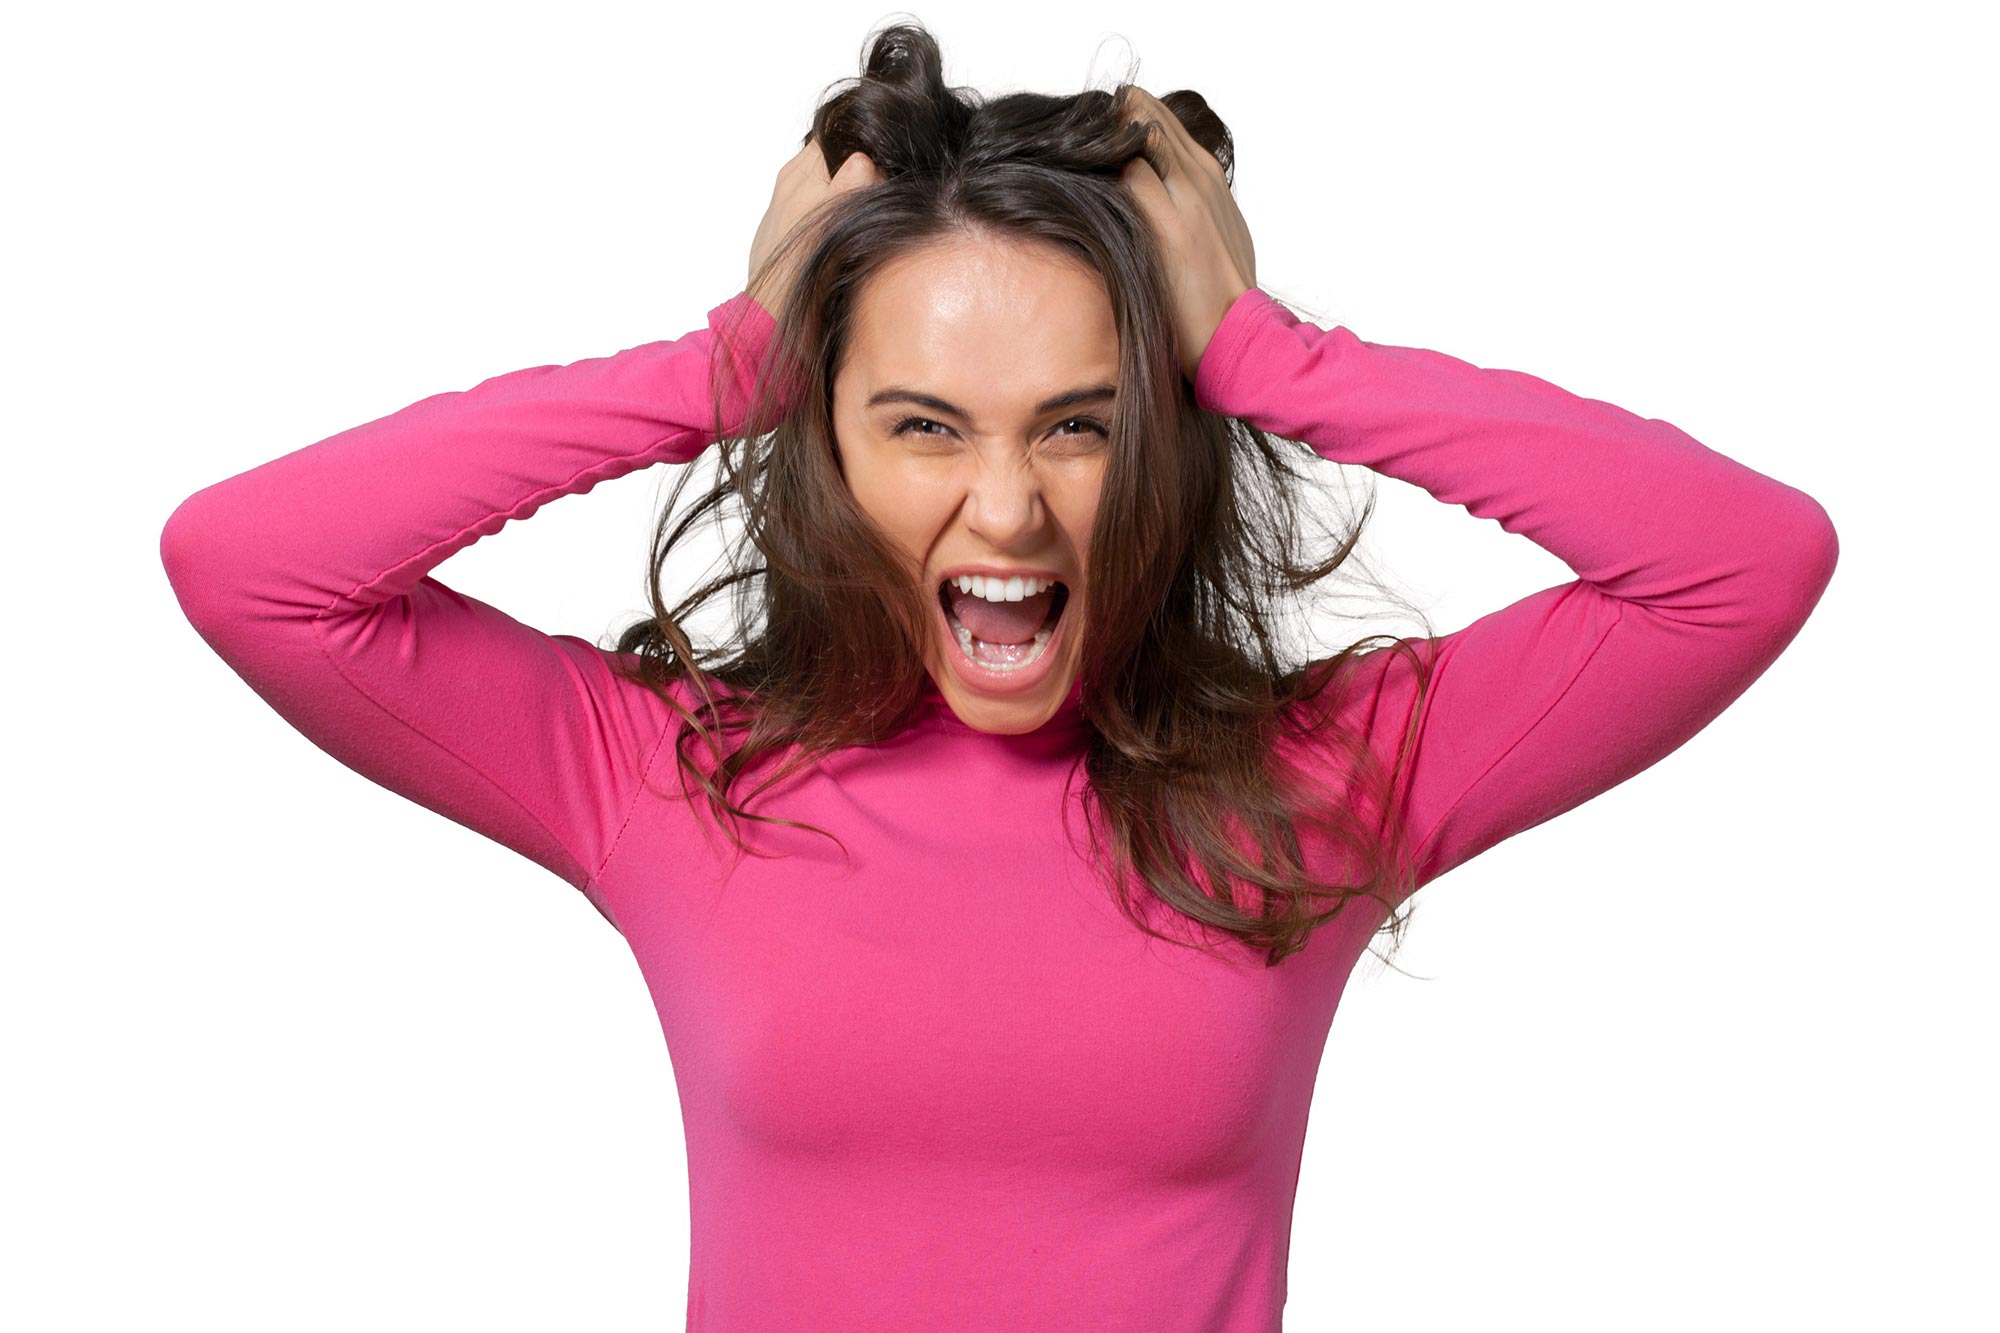 Effective Anger Management: Chilling Out vs. Blowing Off Steam